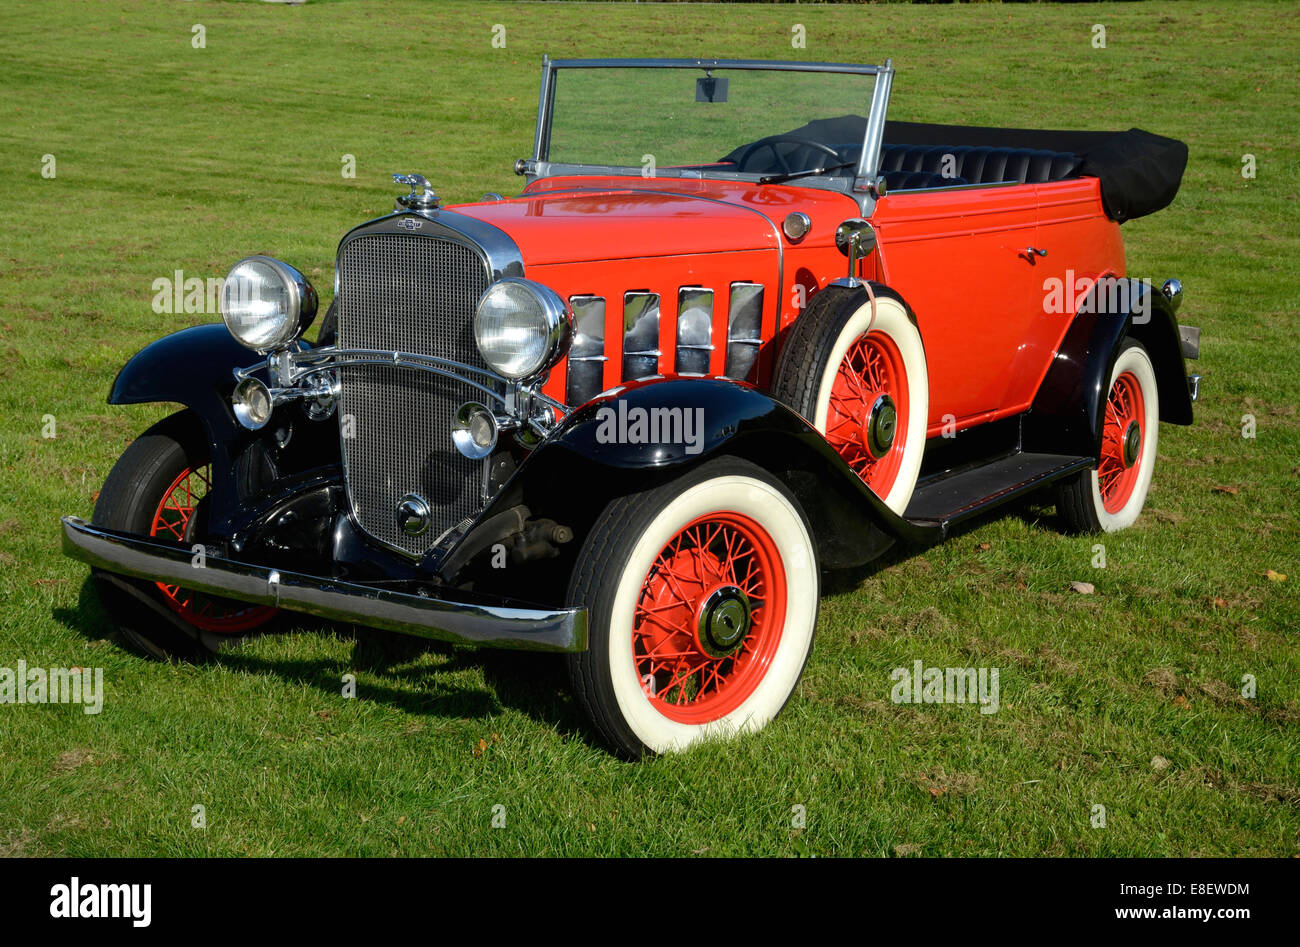 Chevrolet Landau Phanteon Deluxe 1932, one of only 600 cars of this type and the only one in Sweden, Ystad, Scania, Sweden Stock Photo